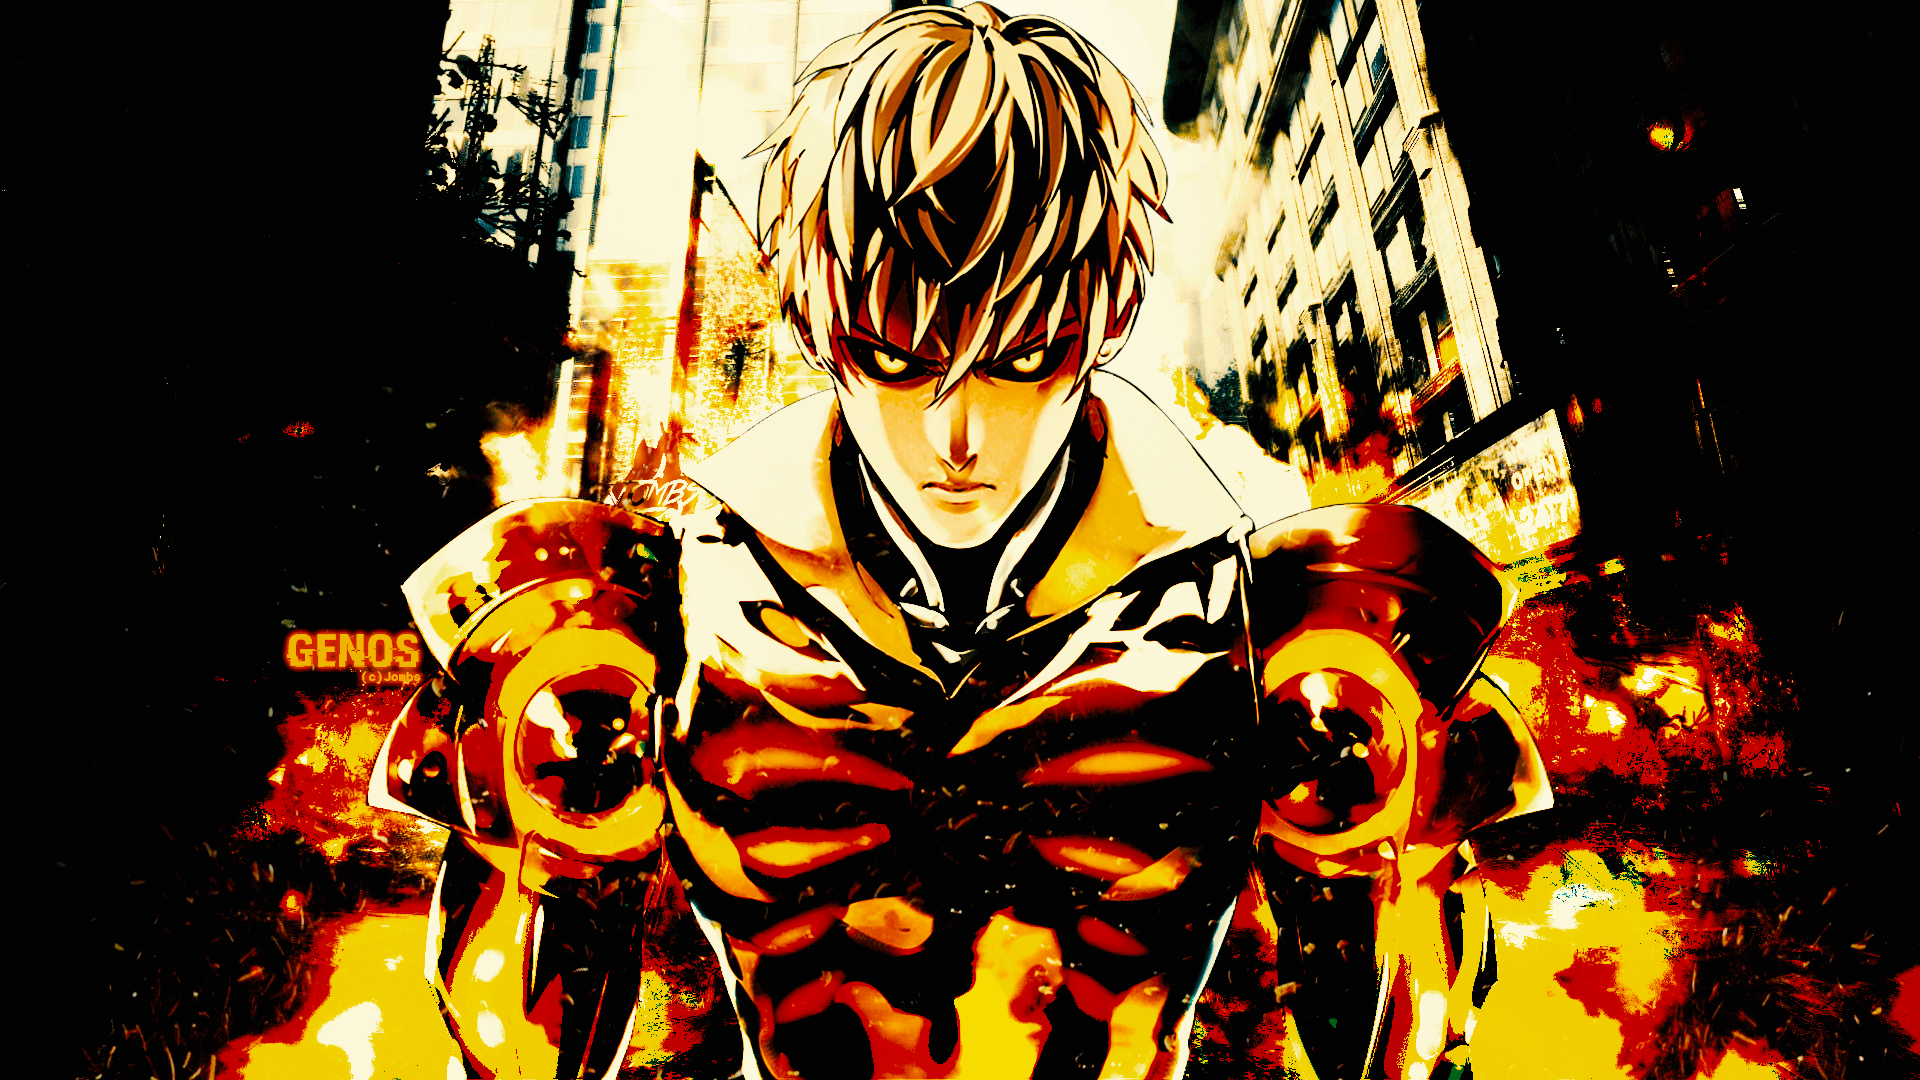 1920x1080 Anime One Punch Man Genos One Punch Man Wallpaper One Punch Man Wallpaper Background Anime